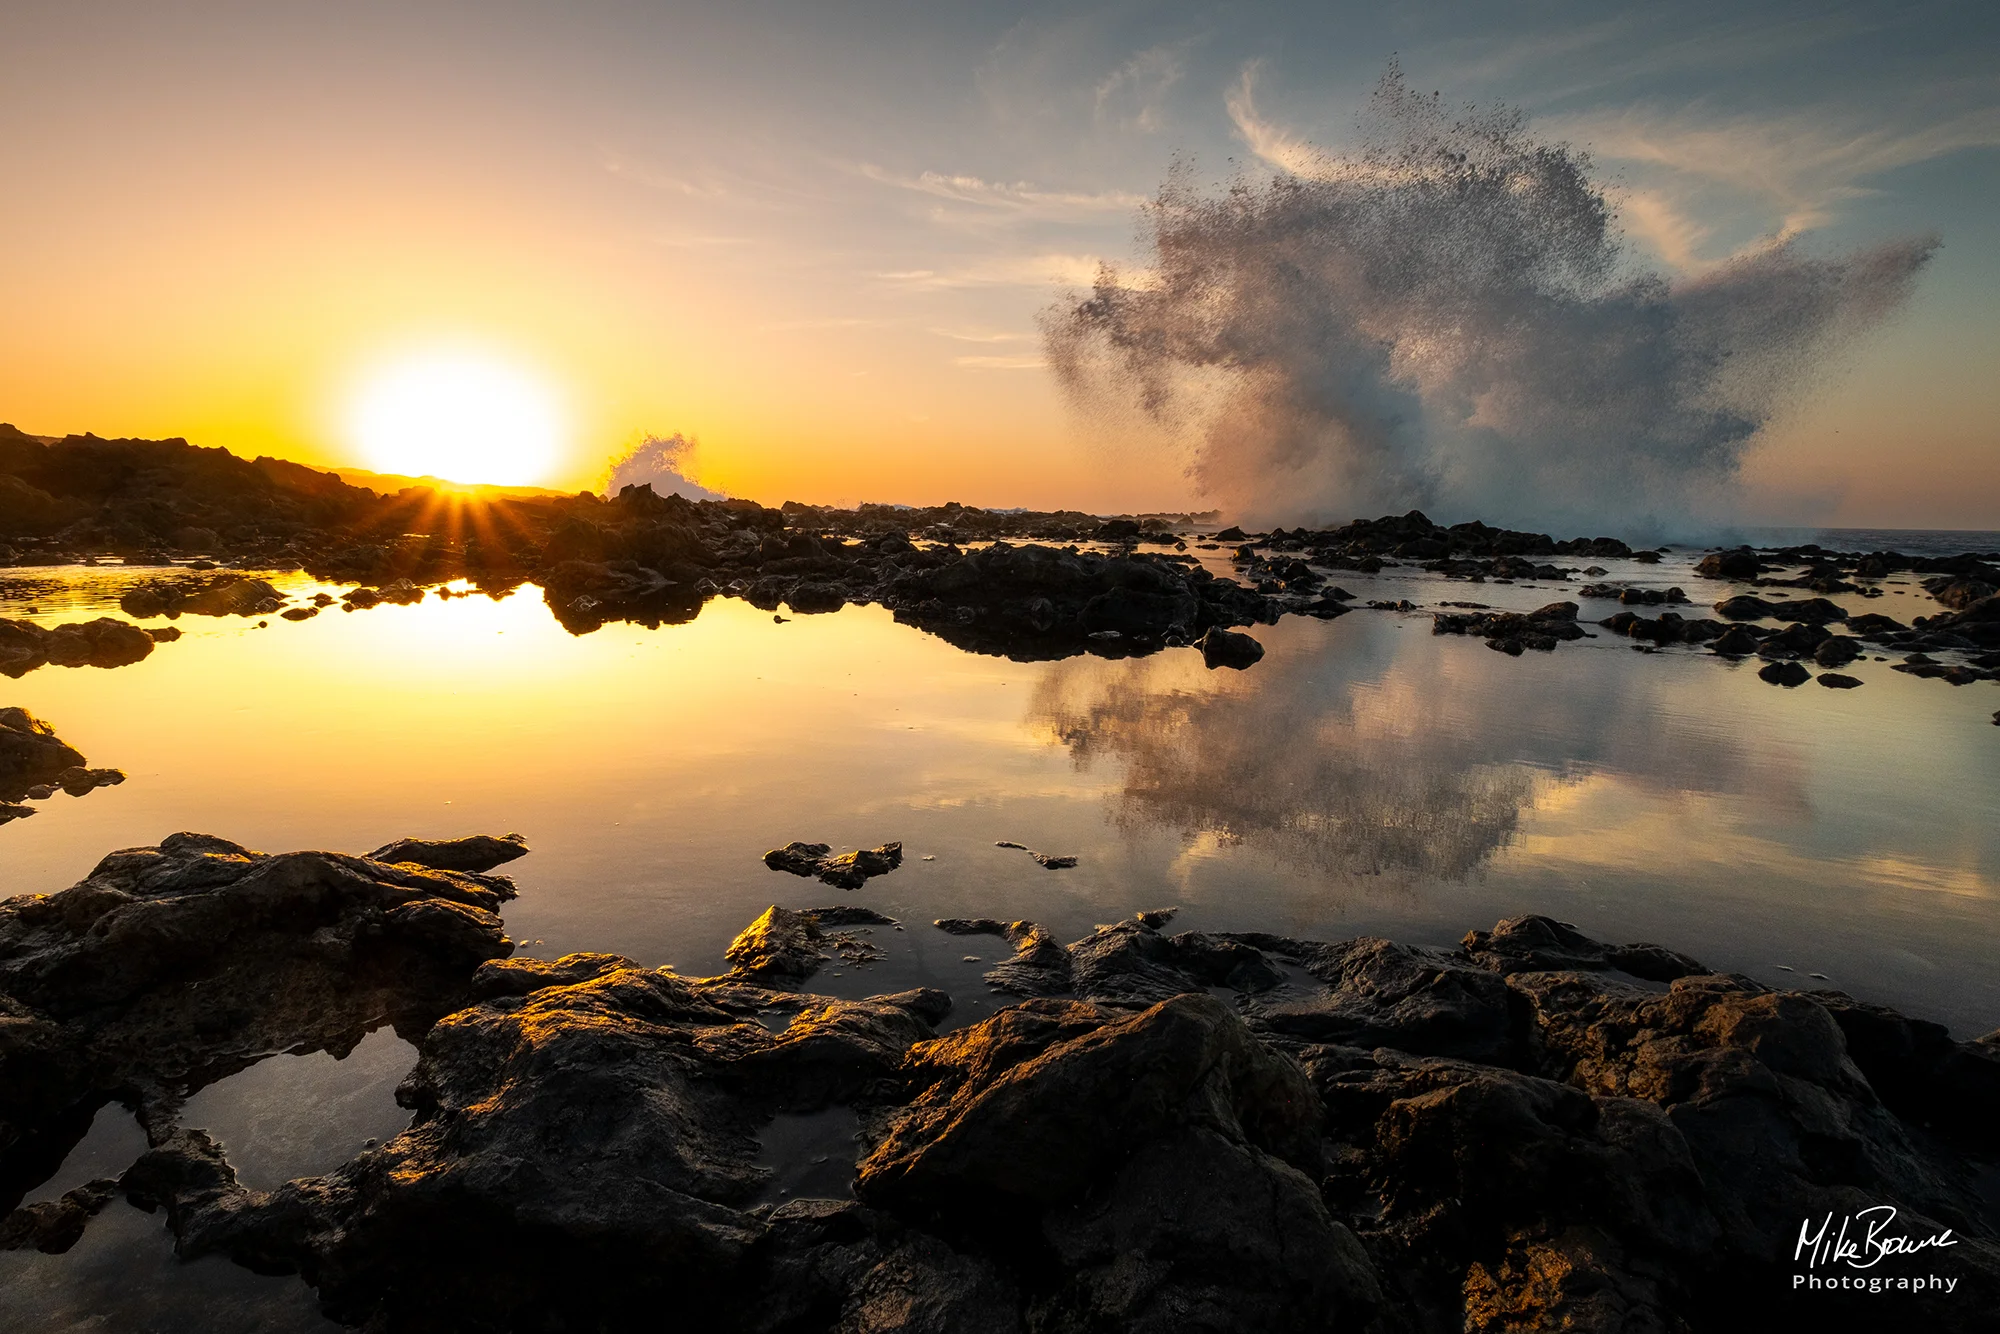 Sunset reflected in rock pool as a wave breaks over the rocks at Tenesera Lanzarote